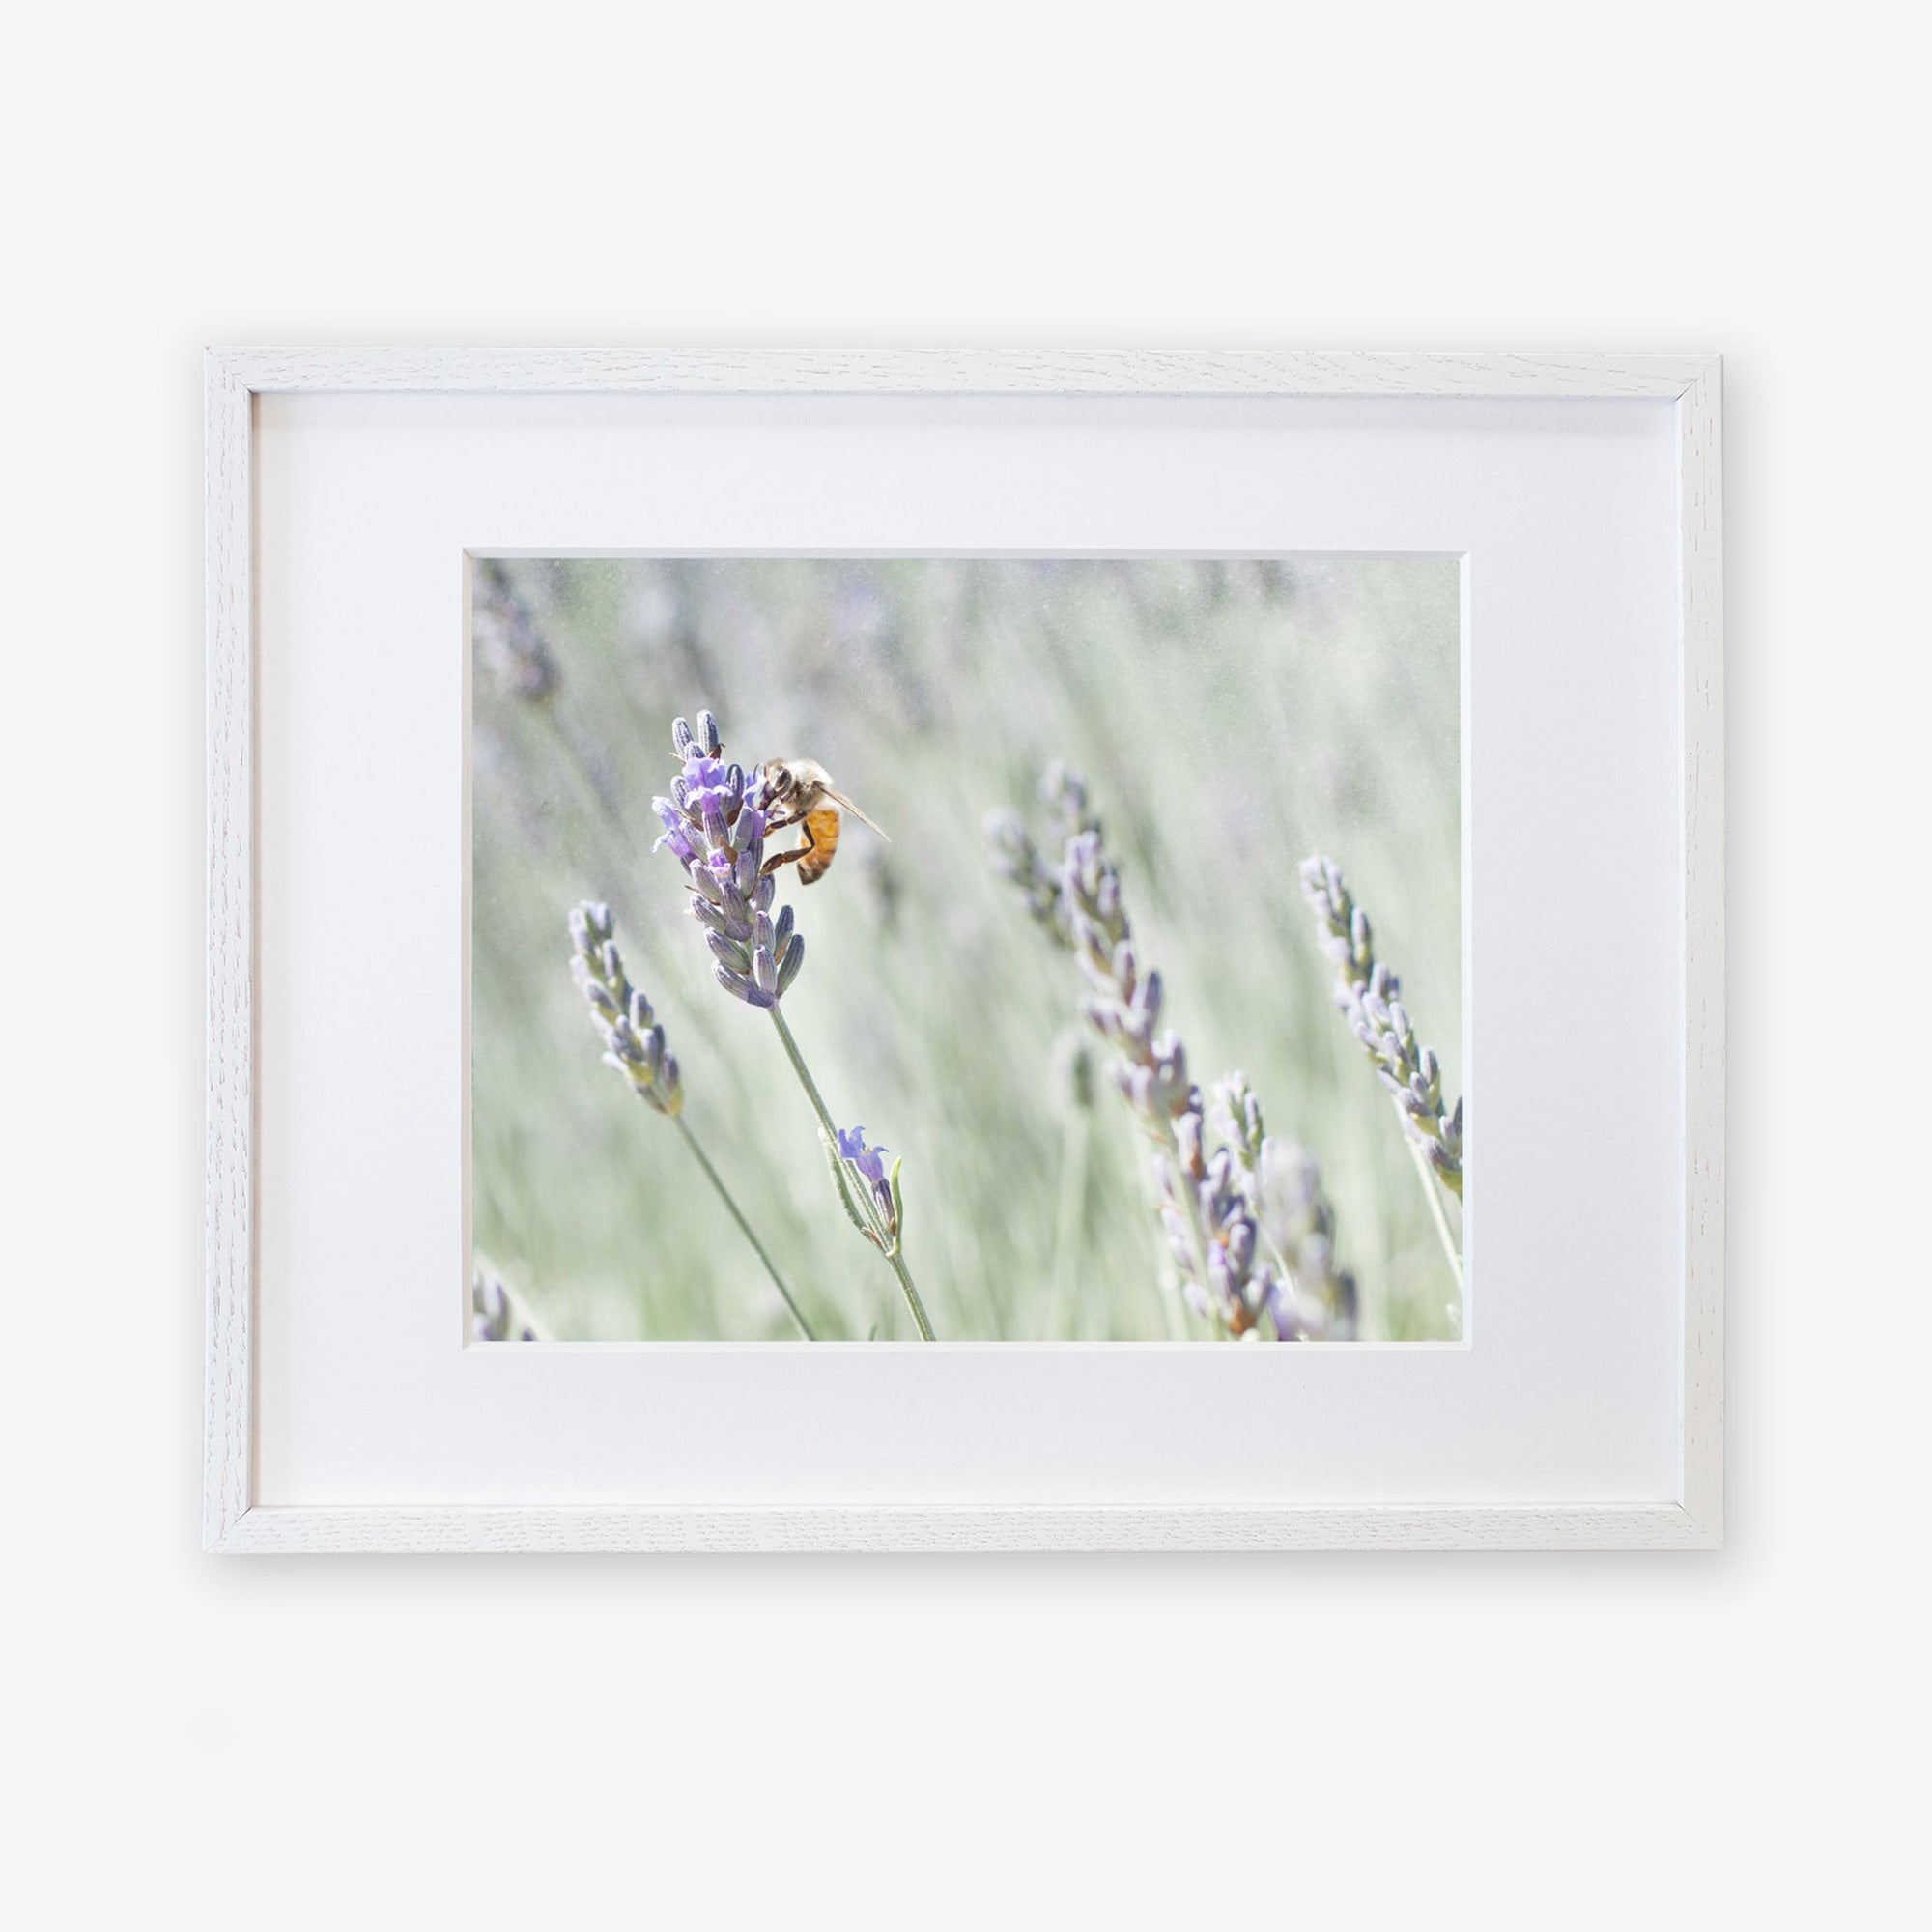 A framed photograph displaying a close-up view of a bee perched on lavender flowers at a lavender farm with a soft, blurred background - Offley Green's Rustic Floral Print, 'Lavender for Bees.'